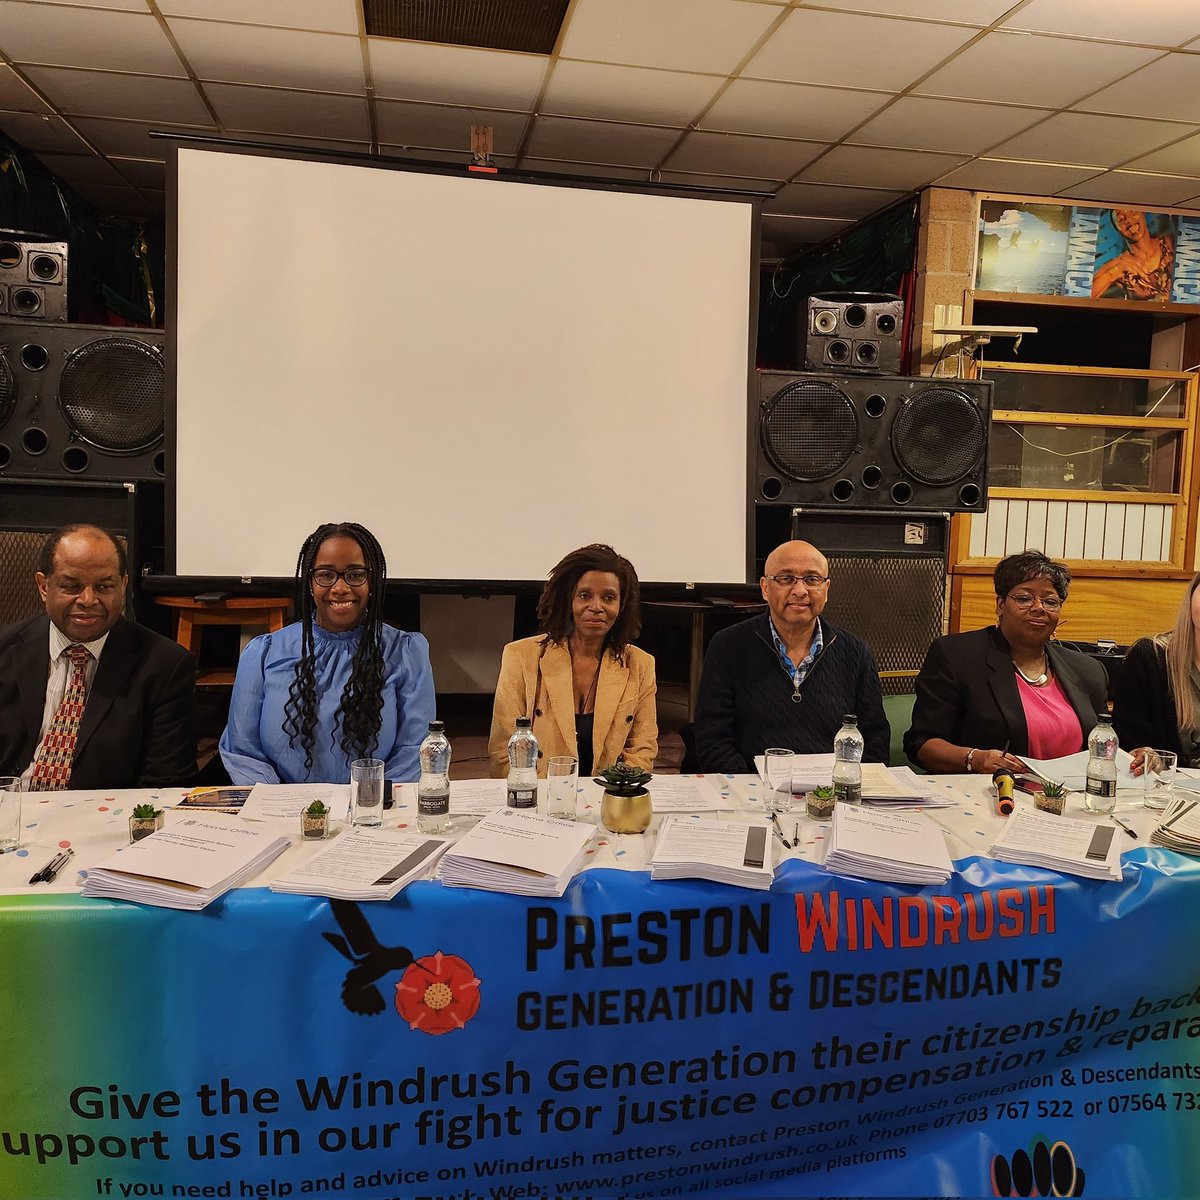 If you gave any questions re Windrush please contact us